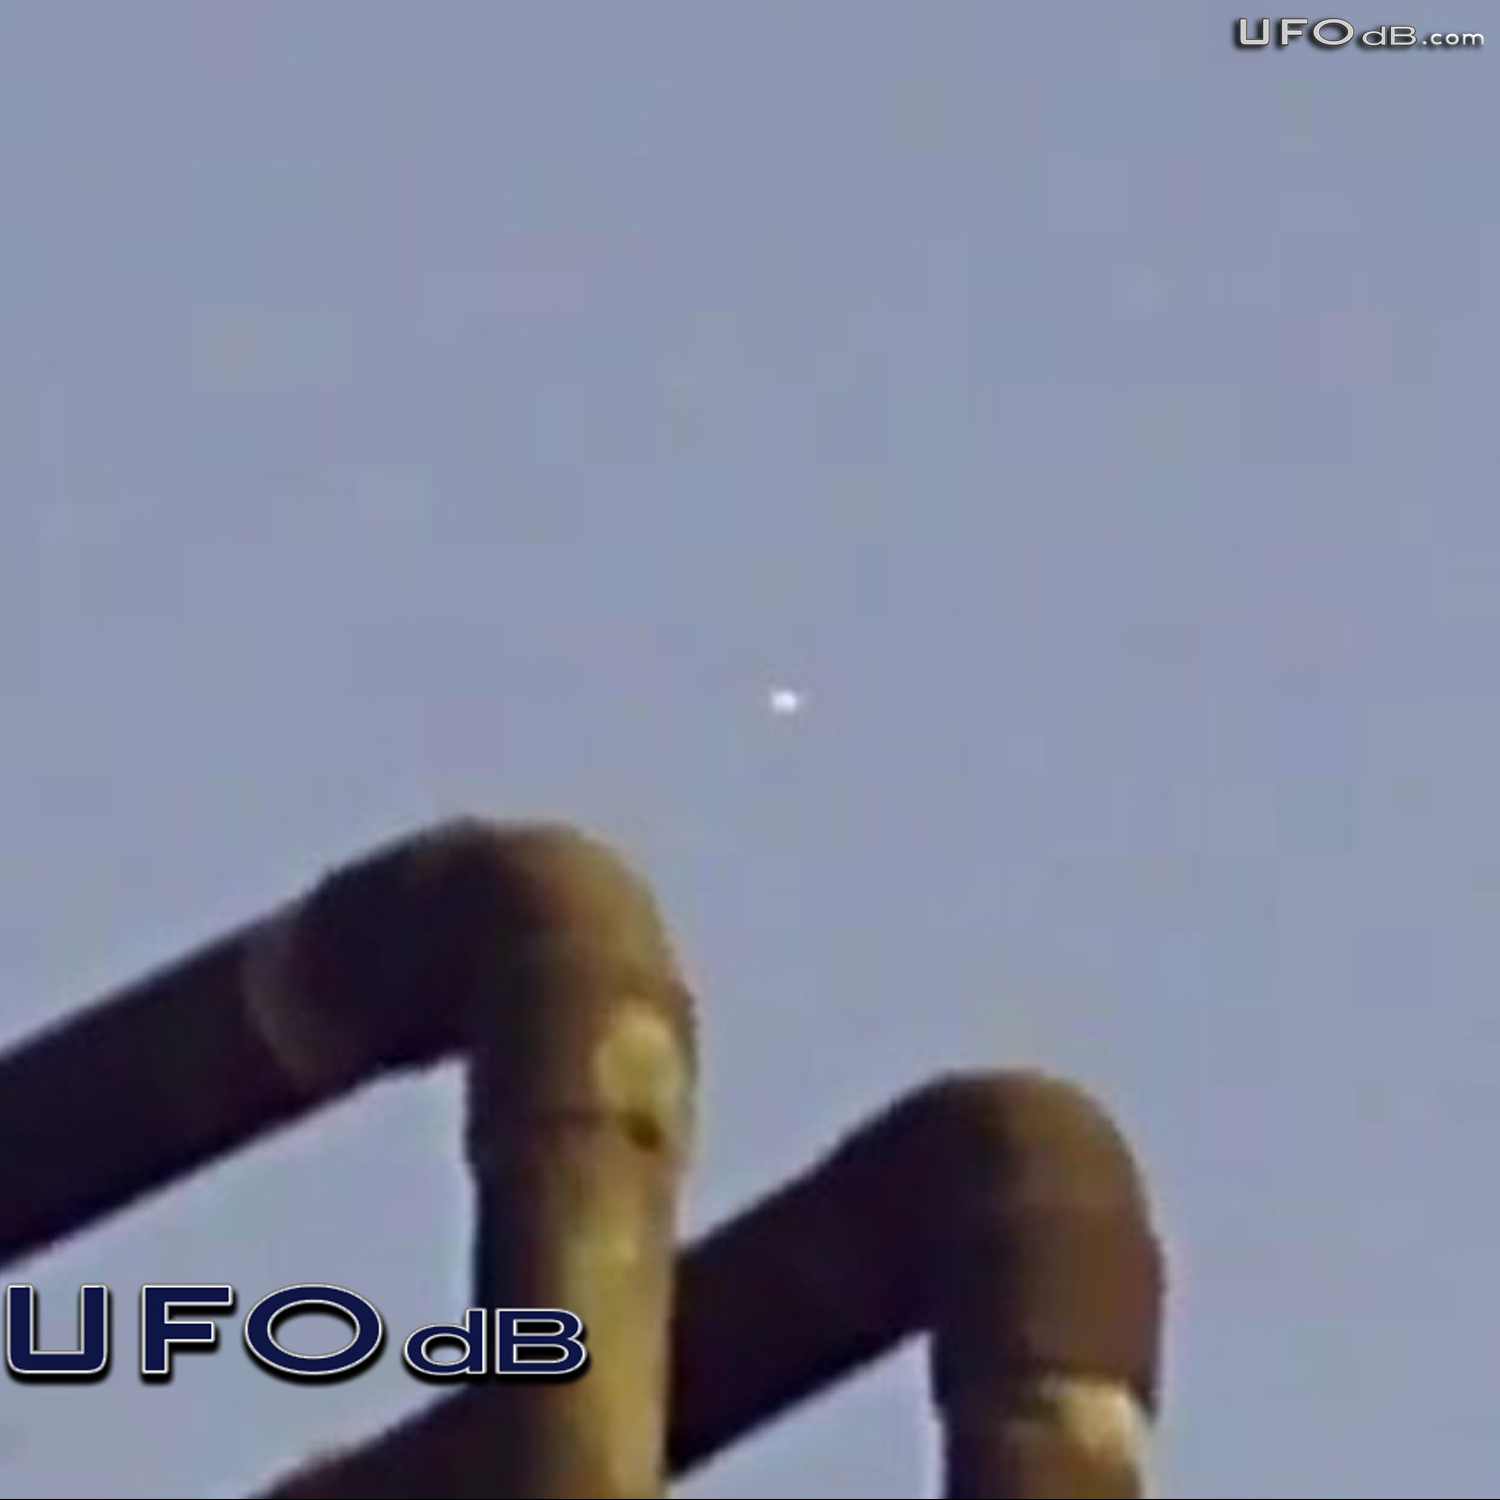 White craft UFO passing in the clouds of Mexico City | May 13 2011 UFO Picture #305-2